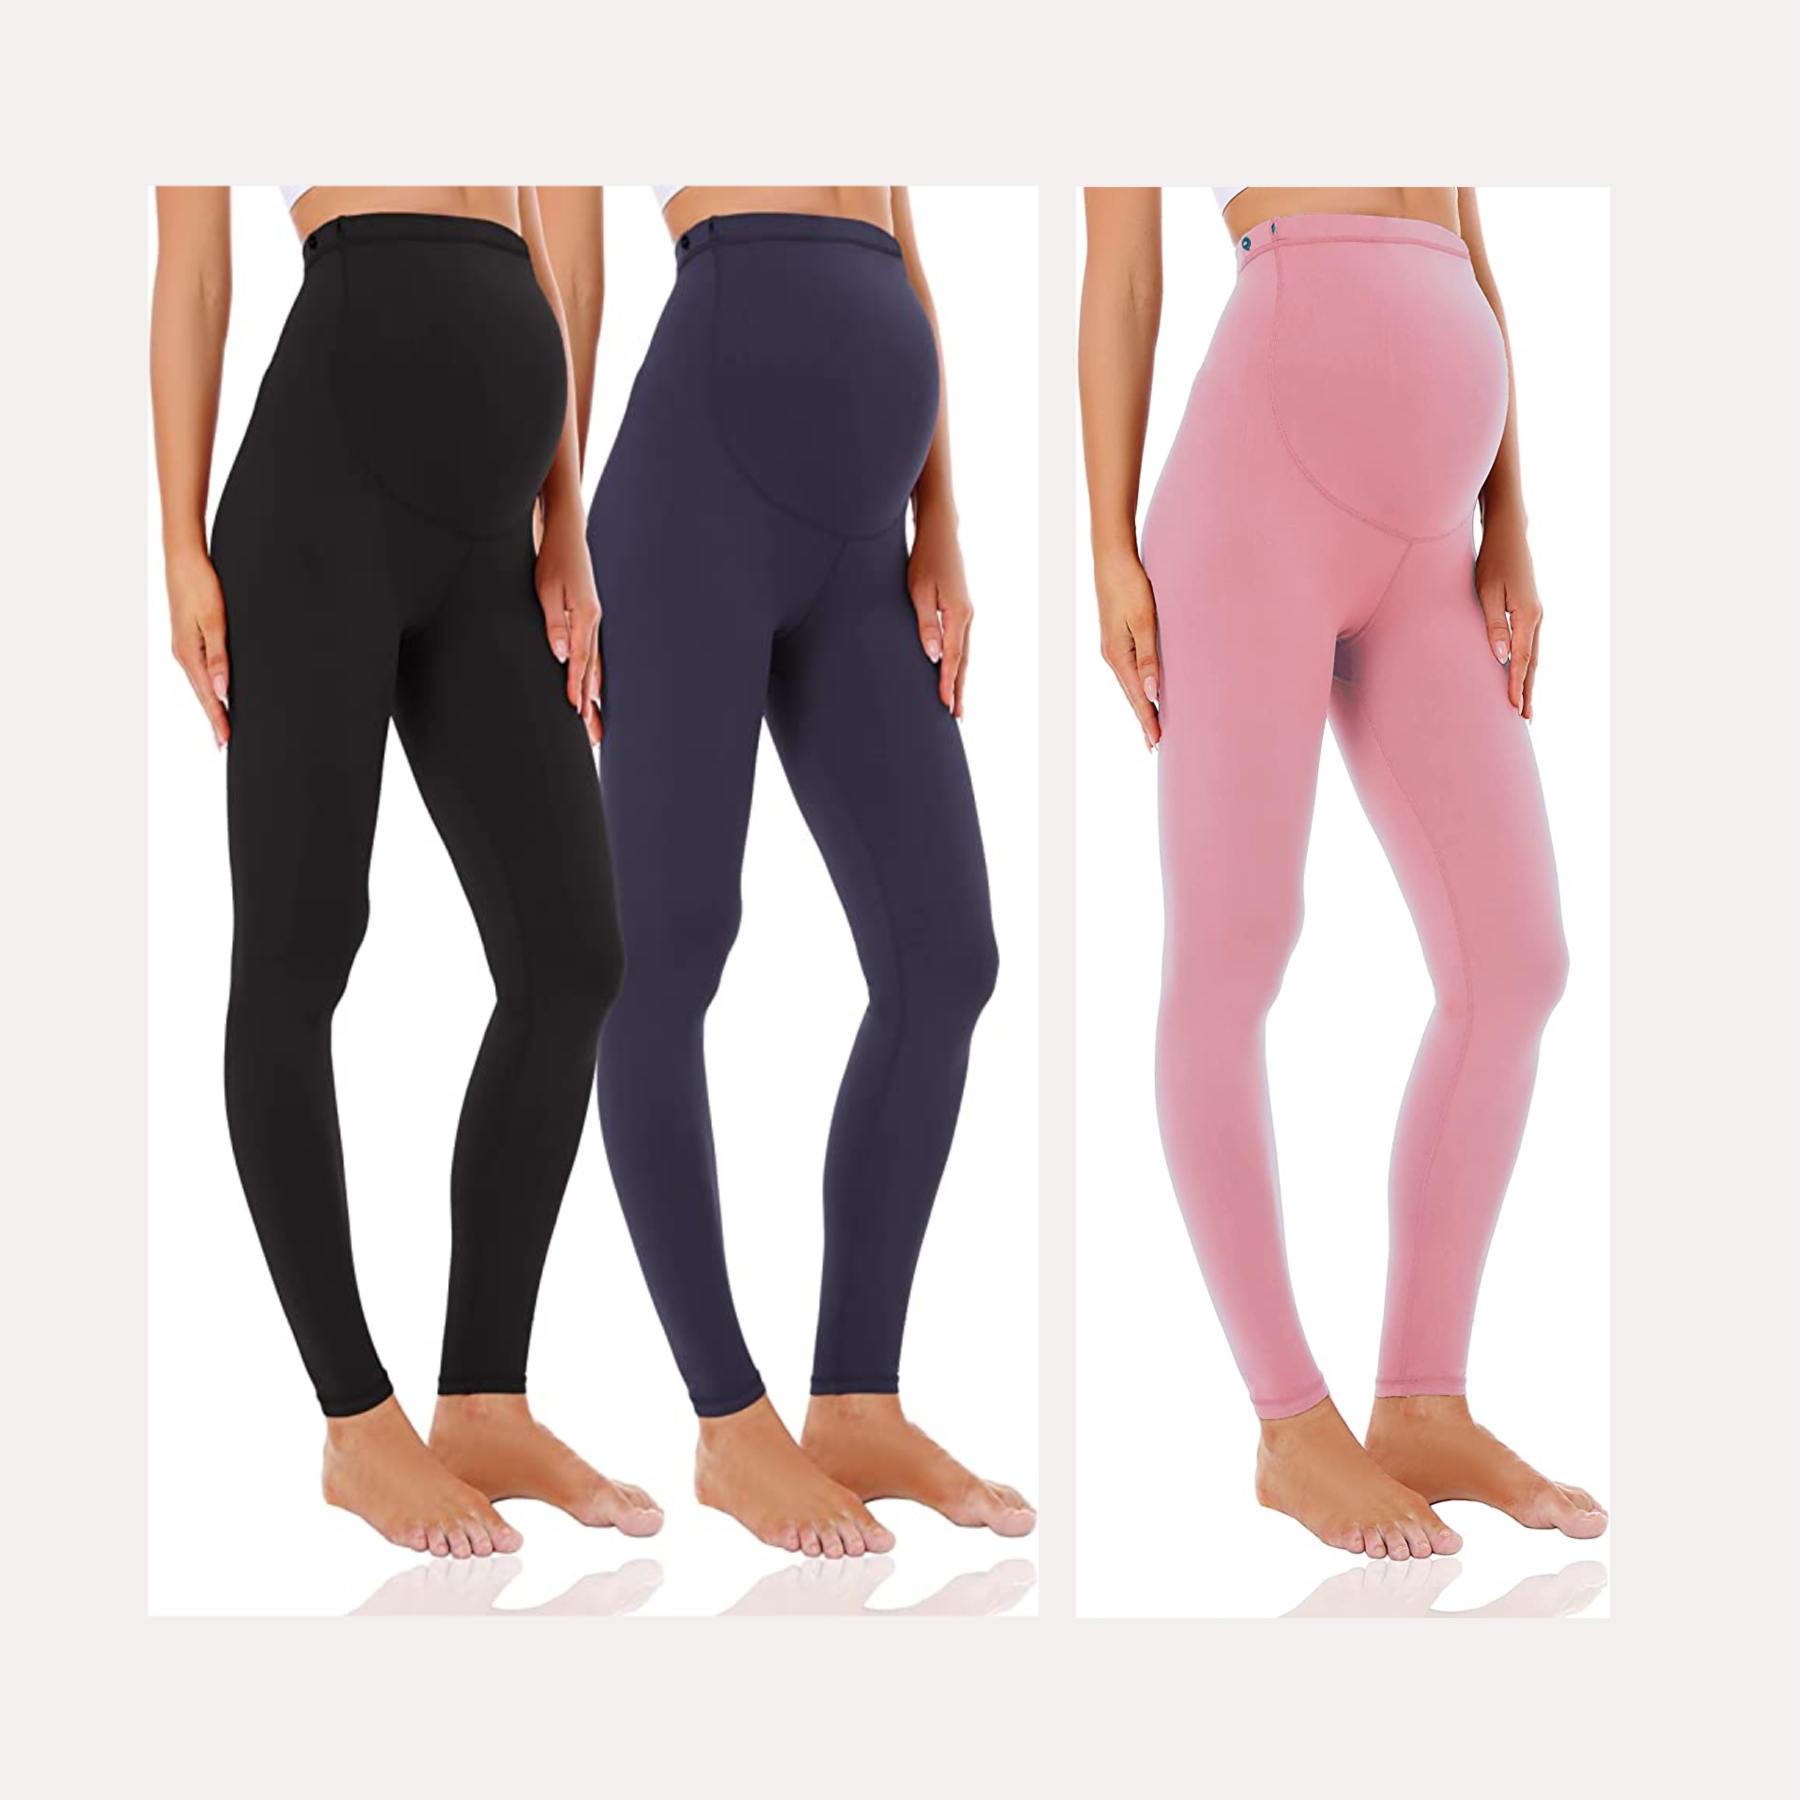 The Best Maternity Leggings You Will Ever Need